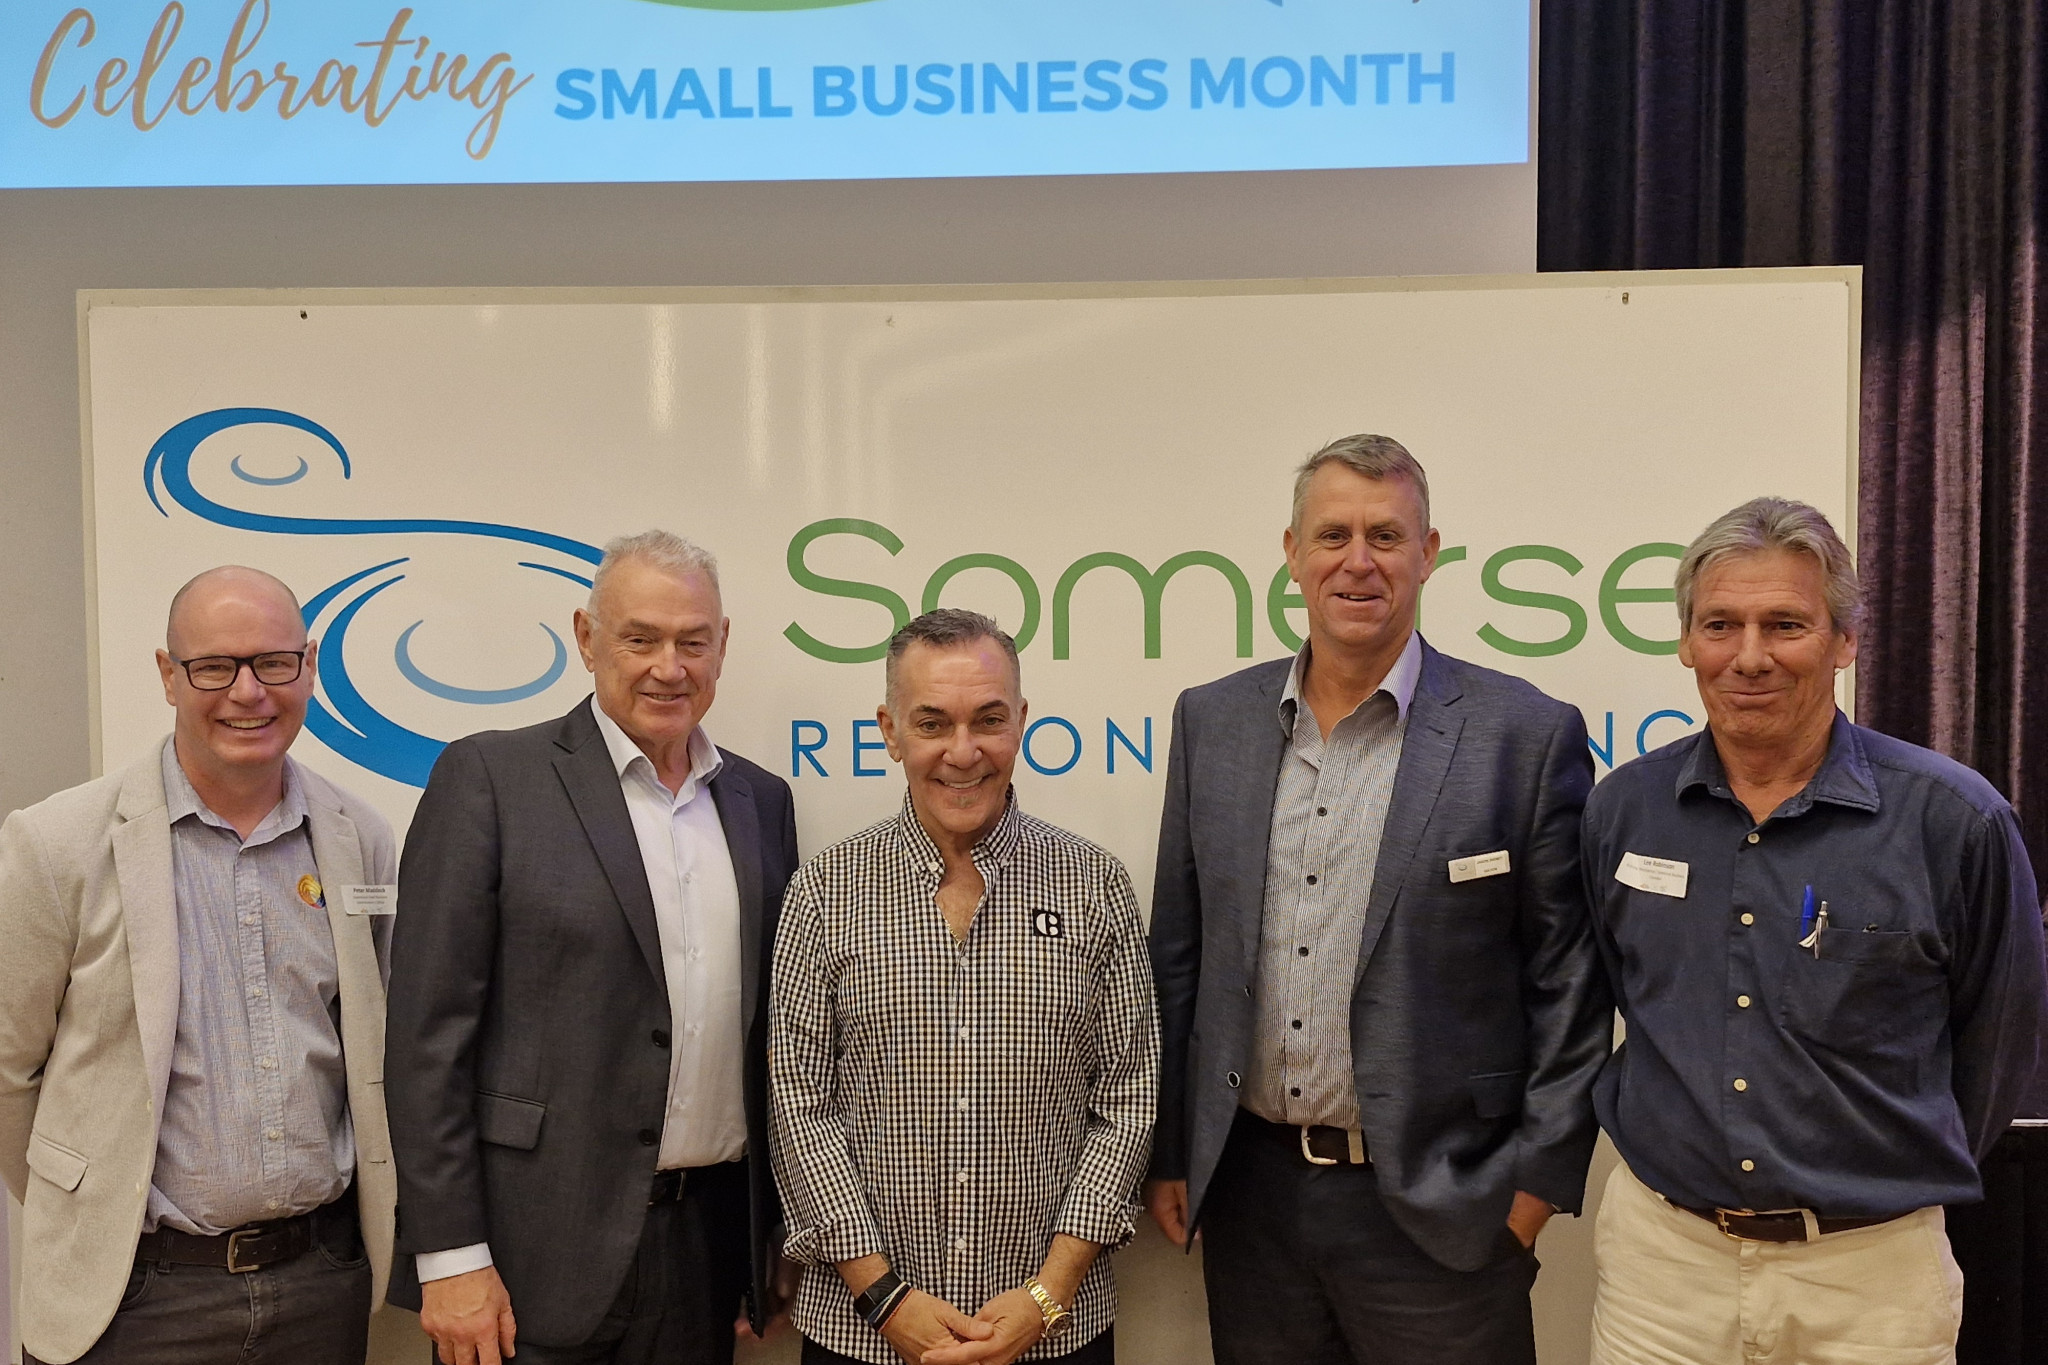 Small Business Commissioners representative Peter Maddock, Southern Queensland Country Tourism CEO Peter Homan, Founder of the Tourism CEO Peter Homan, Founder of the Coffee Club, John Lazarou, Somerset Mayor Jason Wendt, and Lee Robinson from the Somerset Business Chamber.